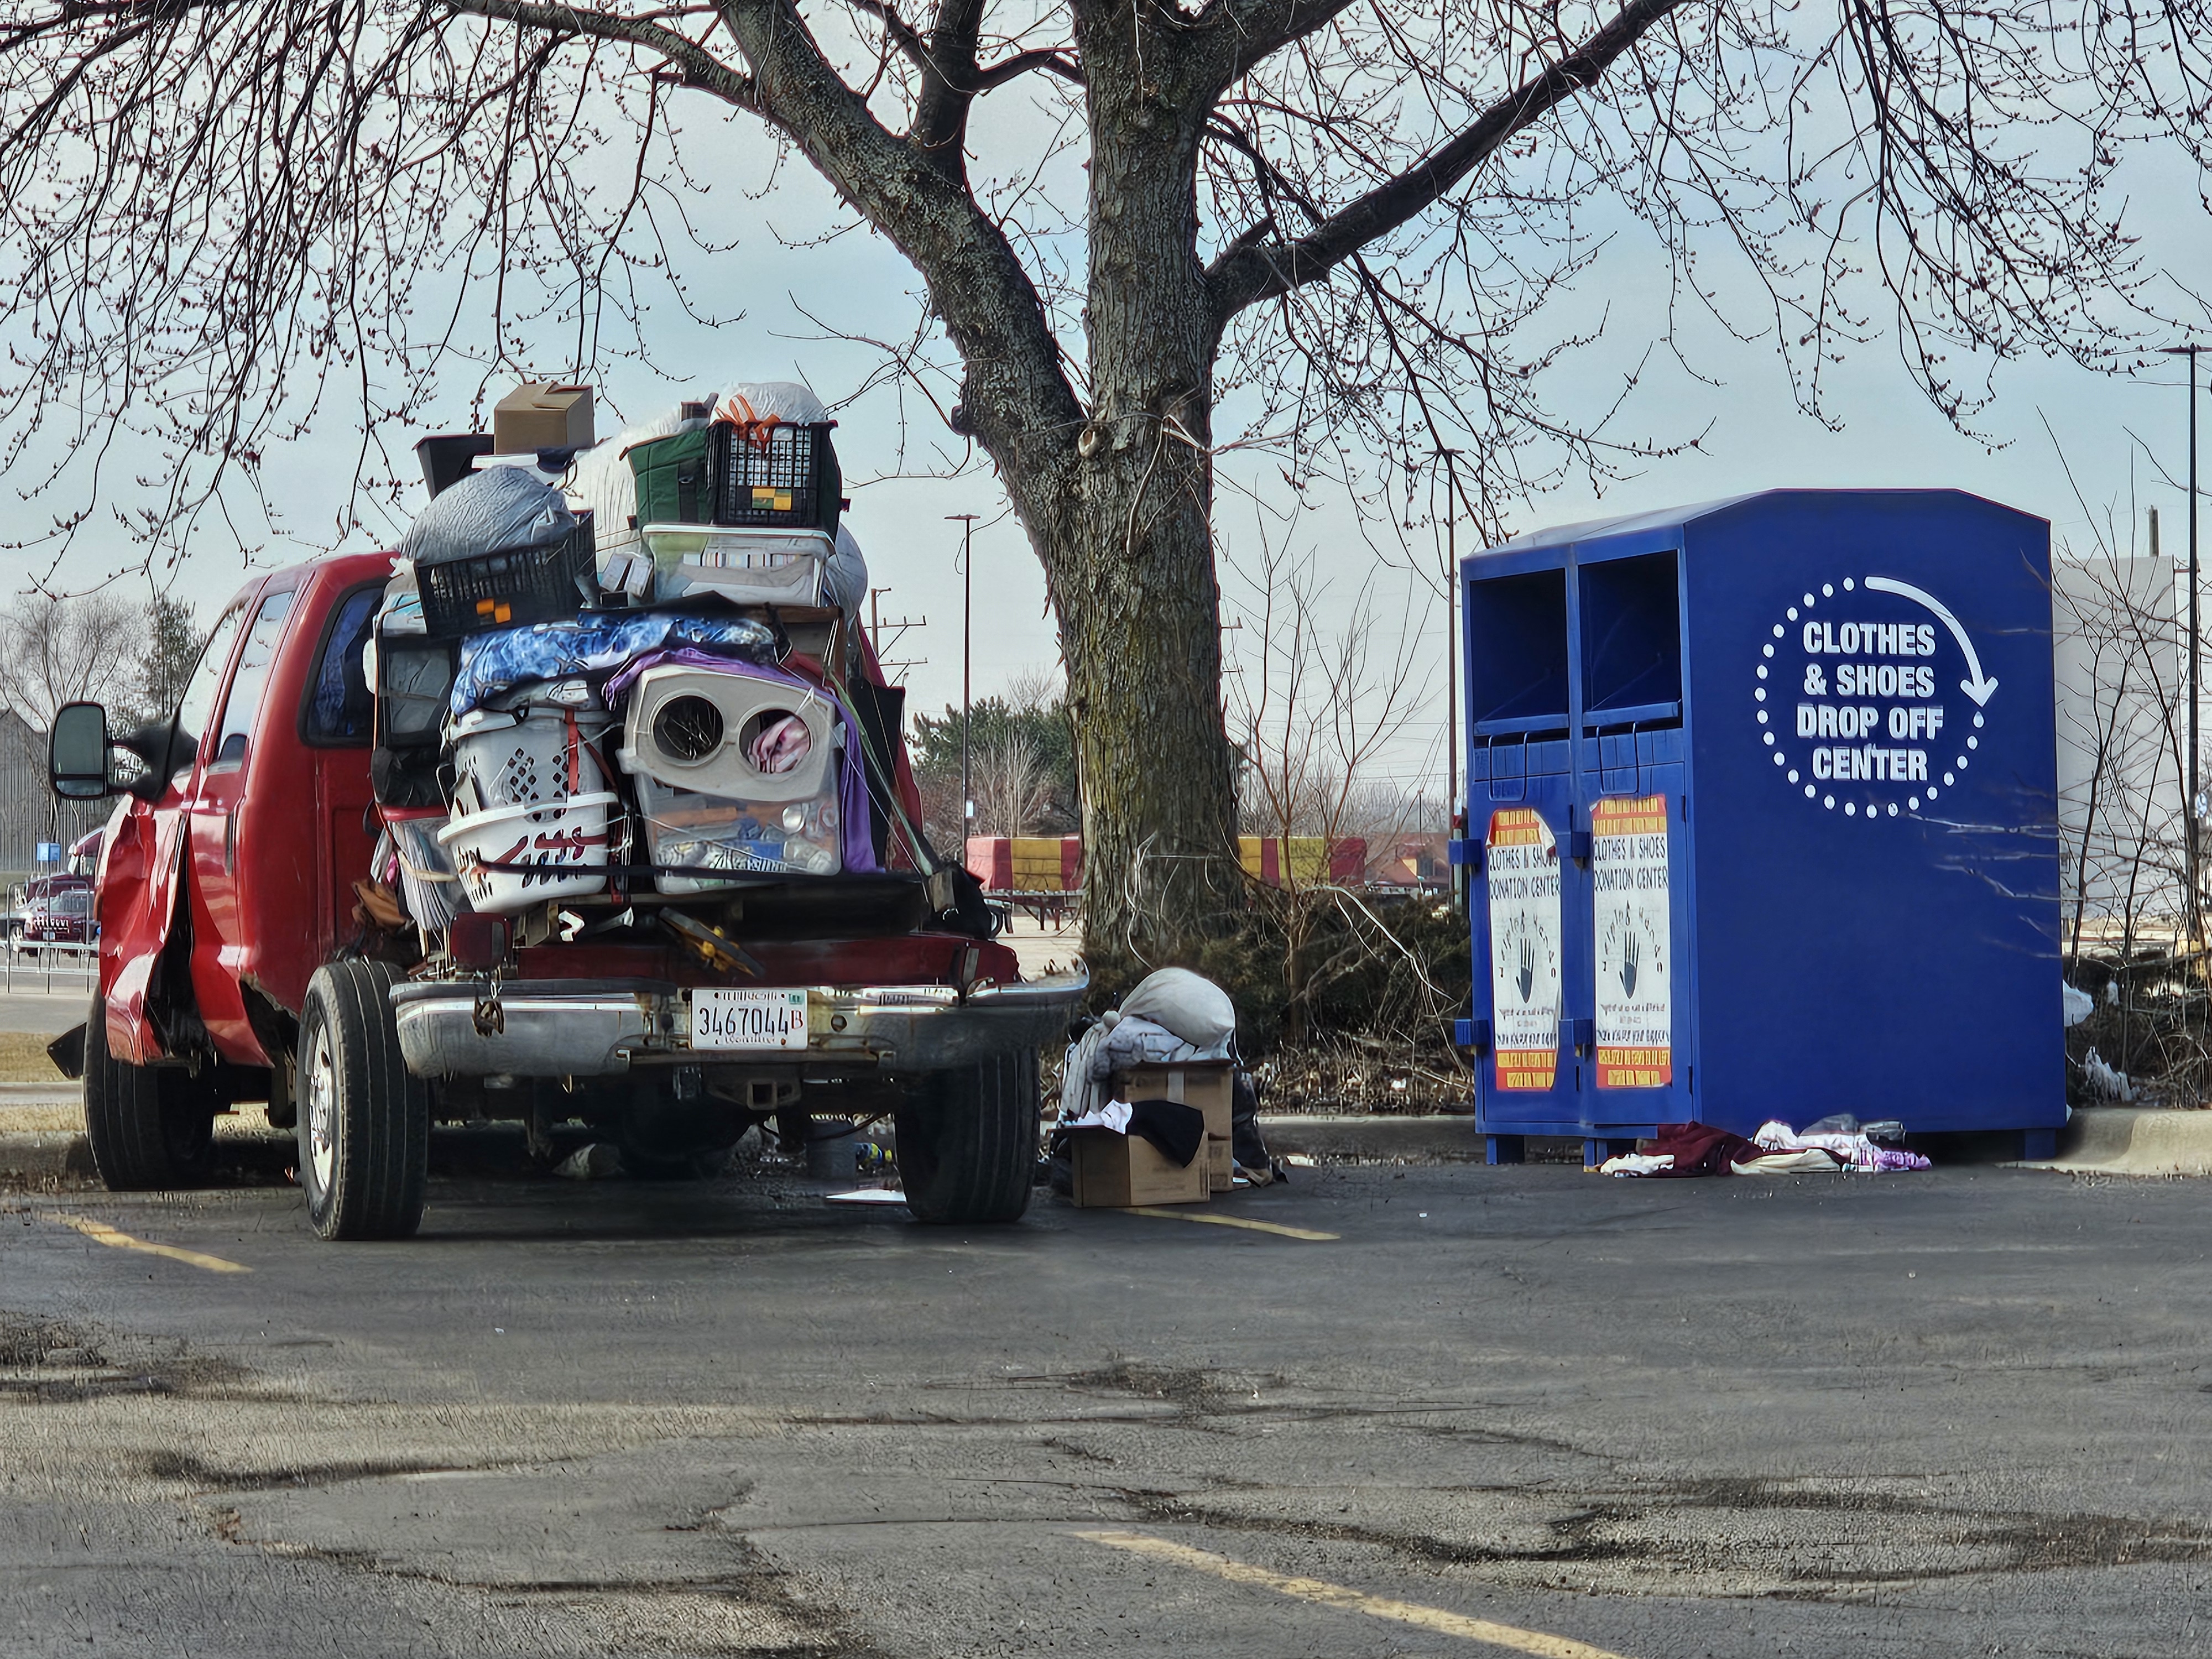 Drop-off-center-off-of-Lincolnway-accepting-more-than-just-clothes-and-shoes.jpg